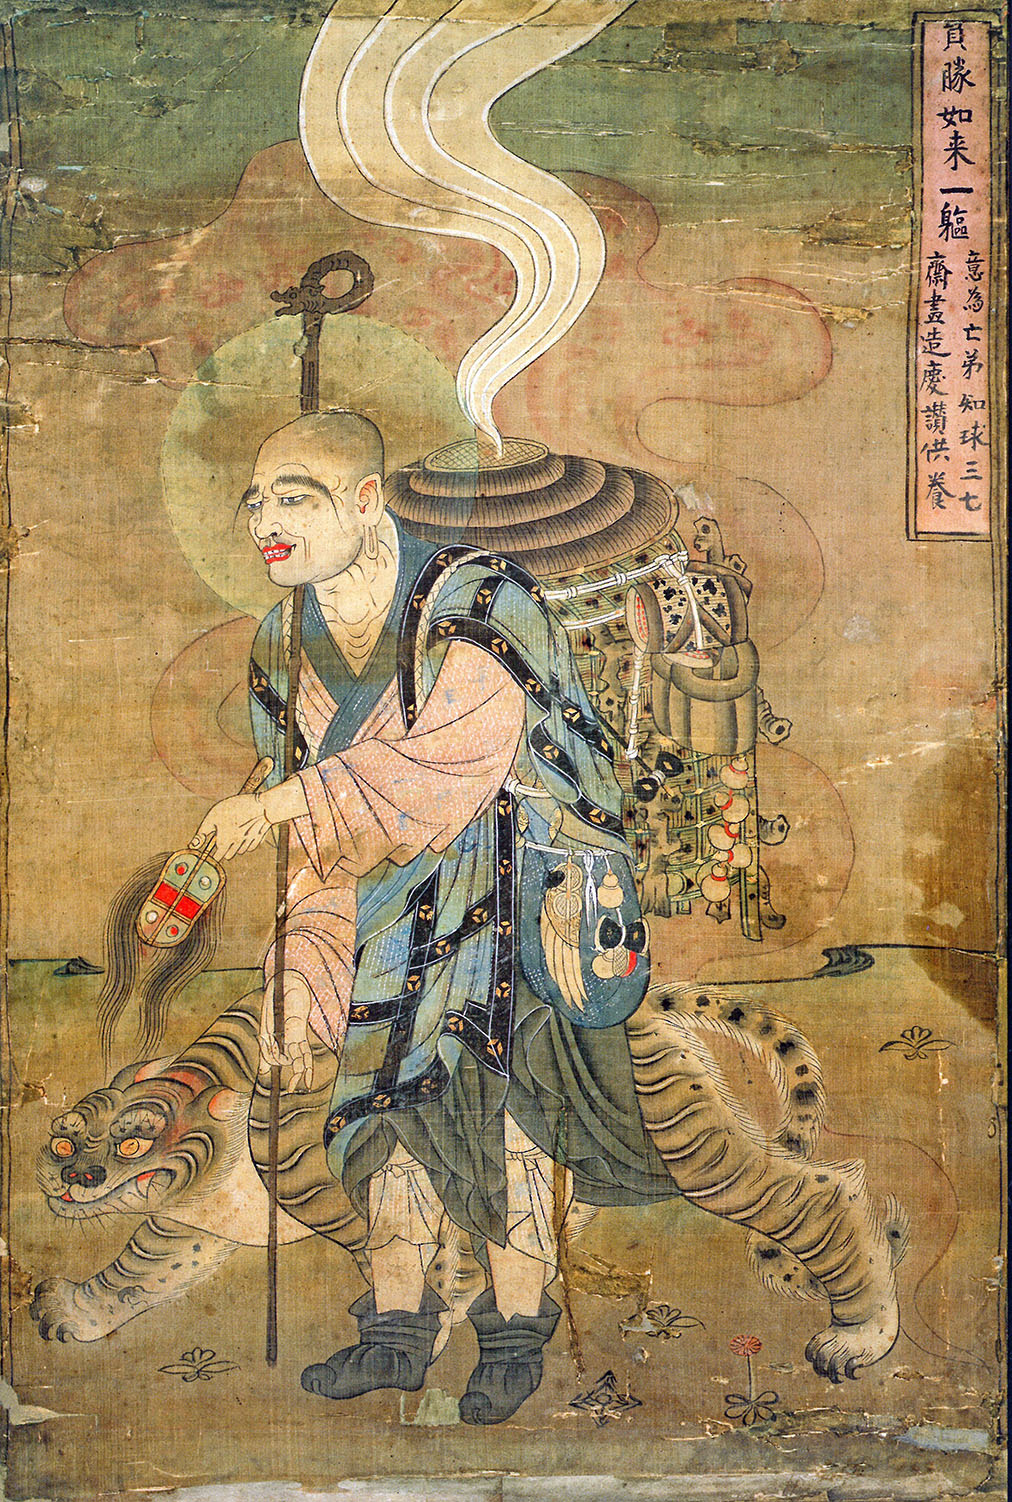 The Dunhuang paintings of “monk with tiger”: a (hi)story of Buddhist and Islamic travels through Asia